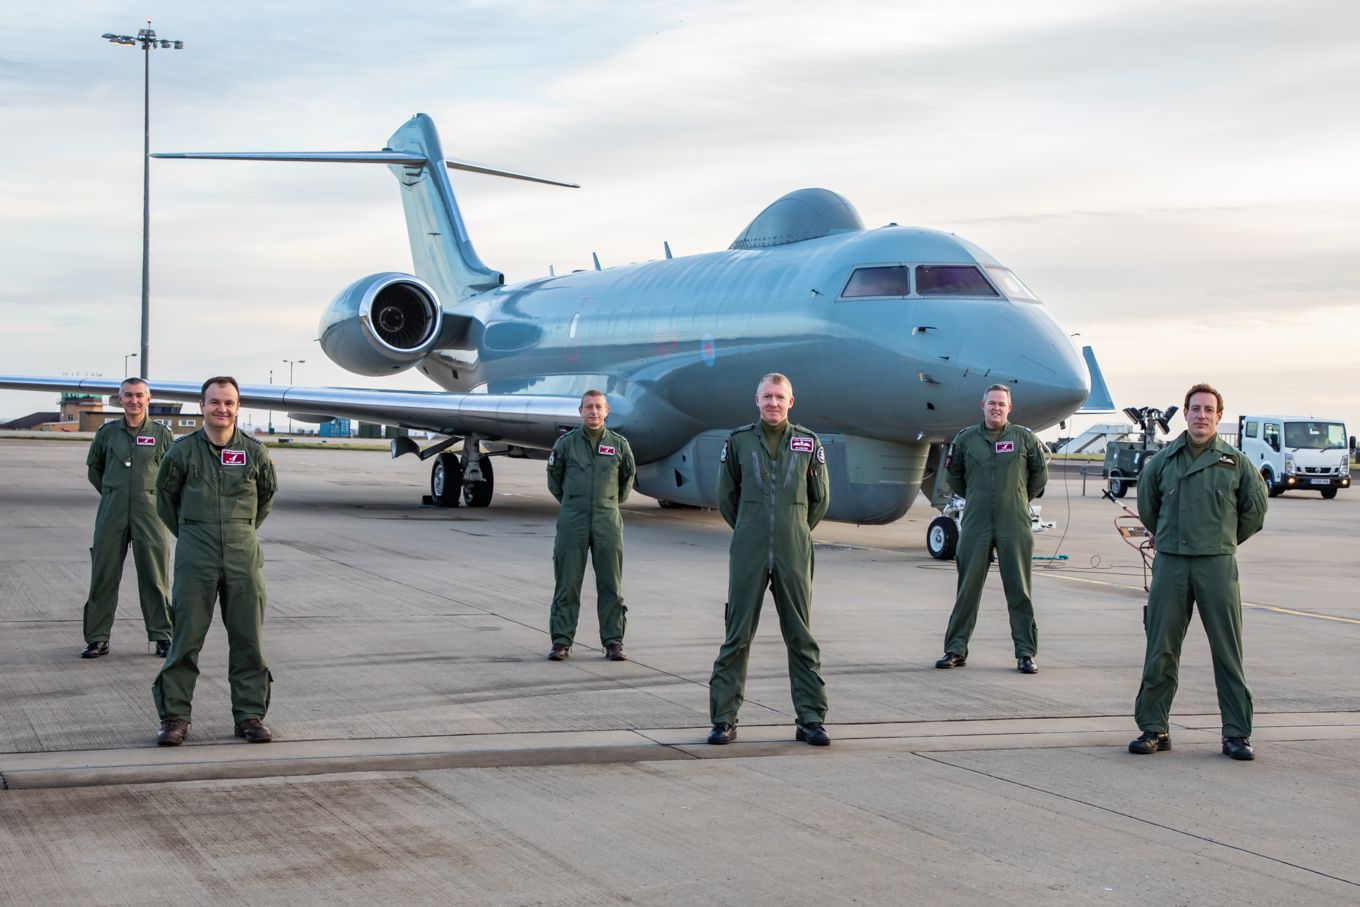 Image shows an RAF Sentinel R1 aircraft on the ground with RAF personnel stood in front.